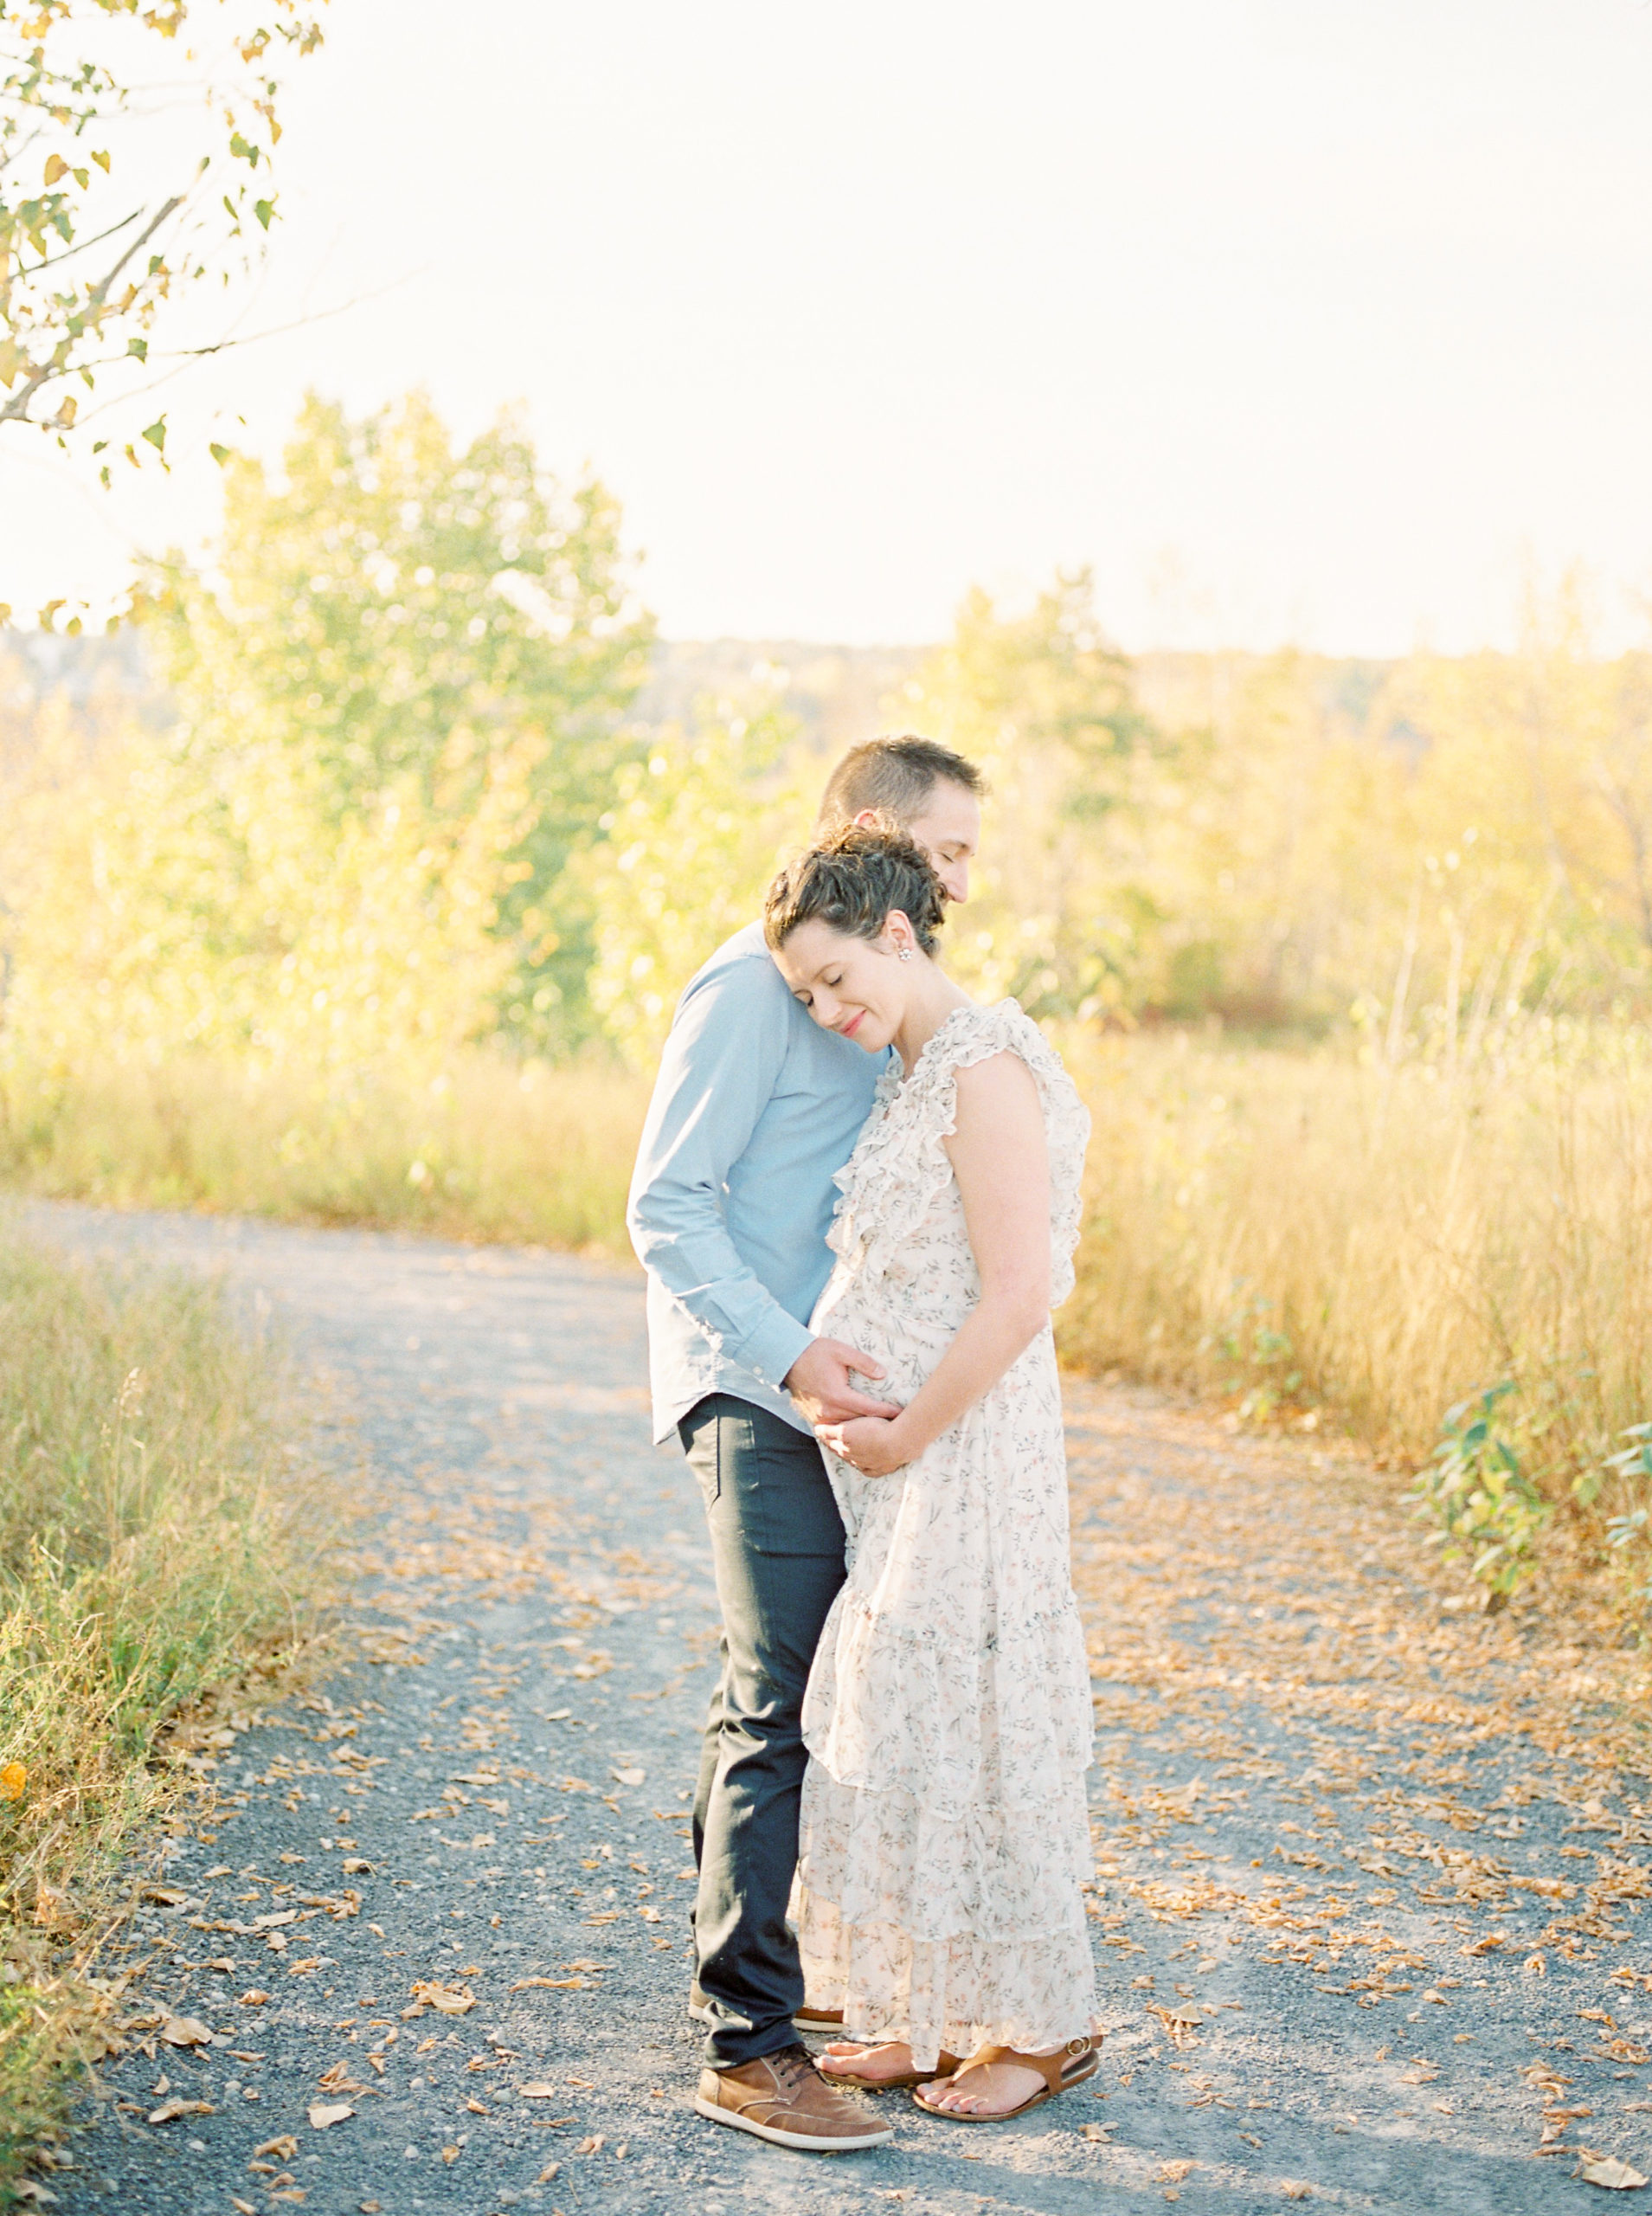 Edmonton Maternity Photographer capturing expectant parents in fall colours